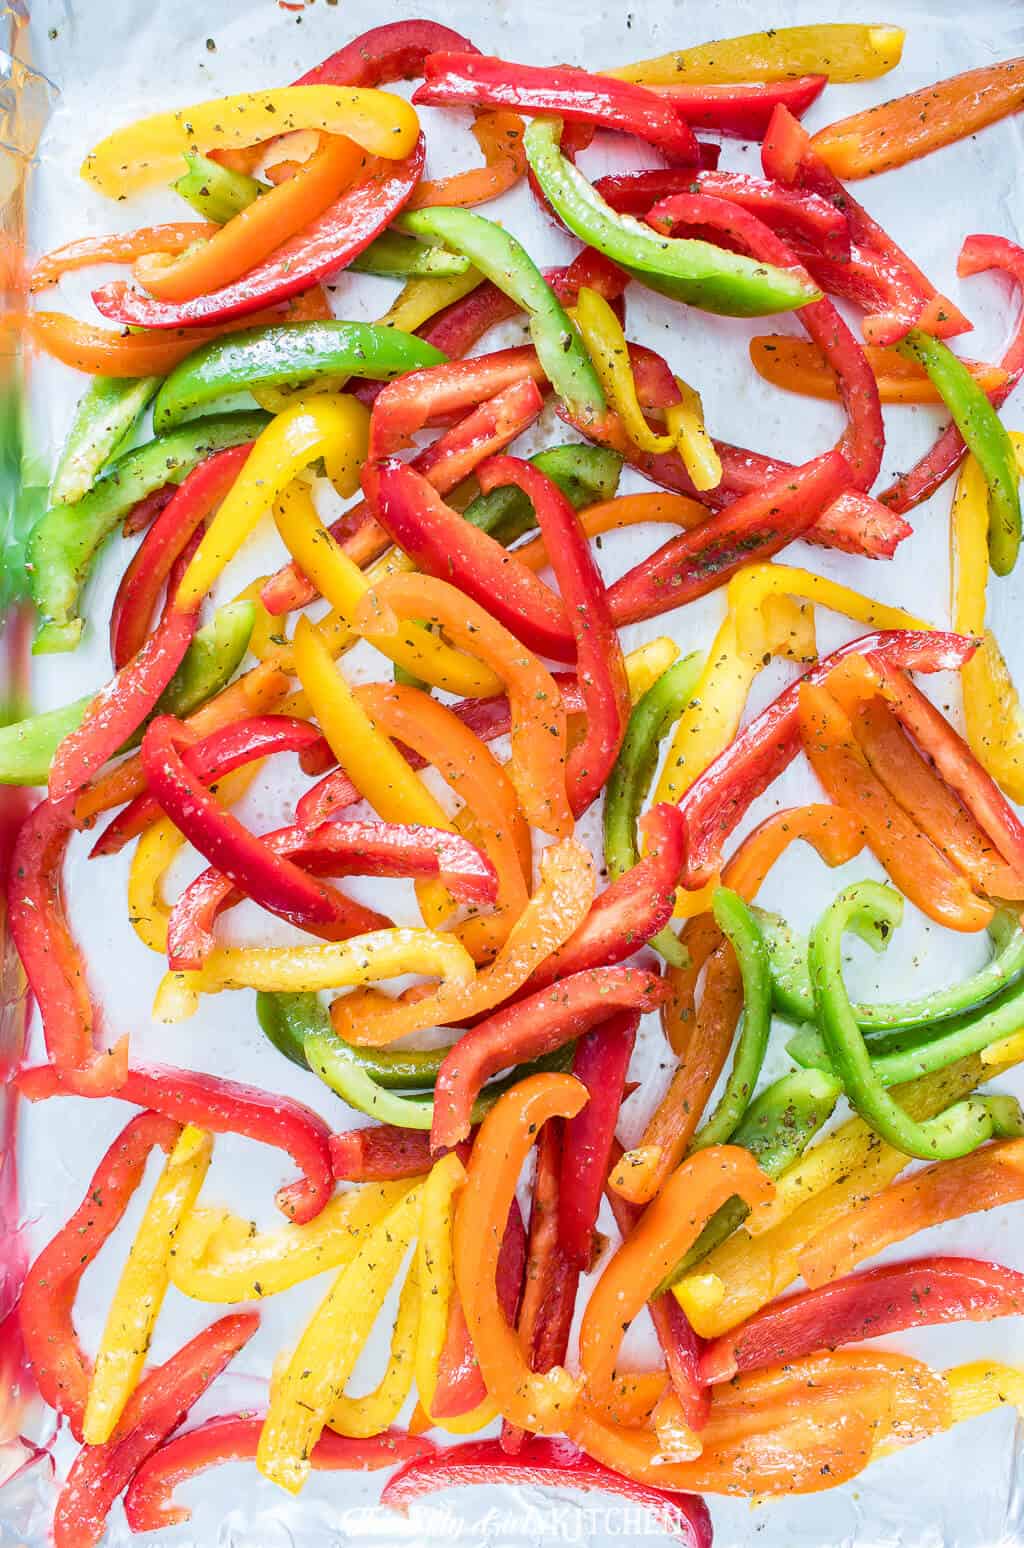 Roasted peppers make for a side dish or topping for many different meals. #recipe from ThisSillyGirlsKitchen.com #roastedpeppers #roastedredpepper #bellpepper #sidedish 